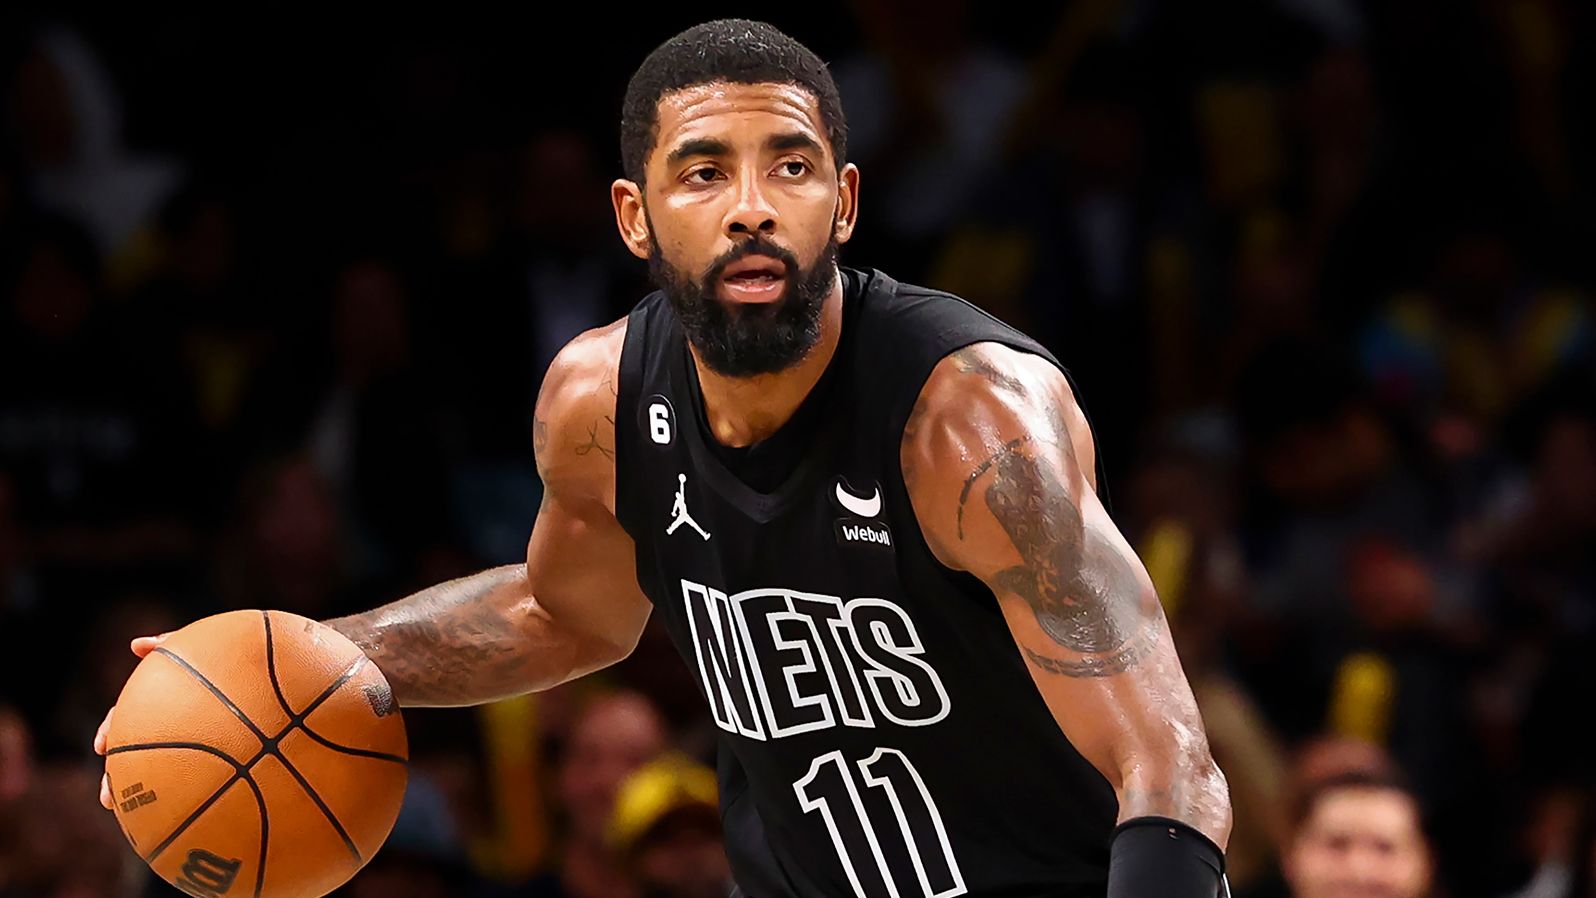 Brooklyn Nets guard Kyrie Irving faces the Indiana Pacers during the second half of an NBA basketball game in New York on October 31, 2022.